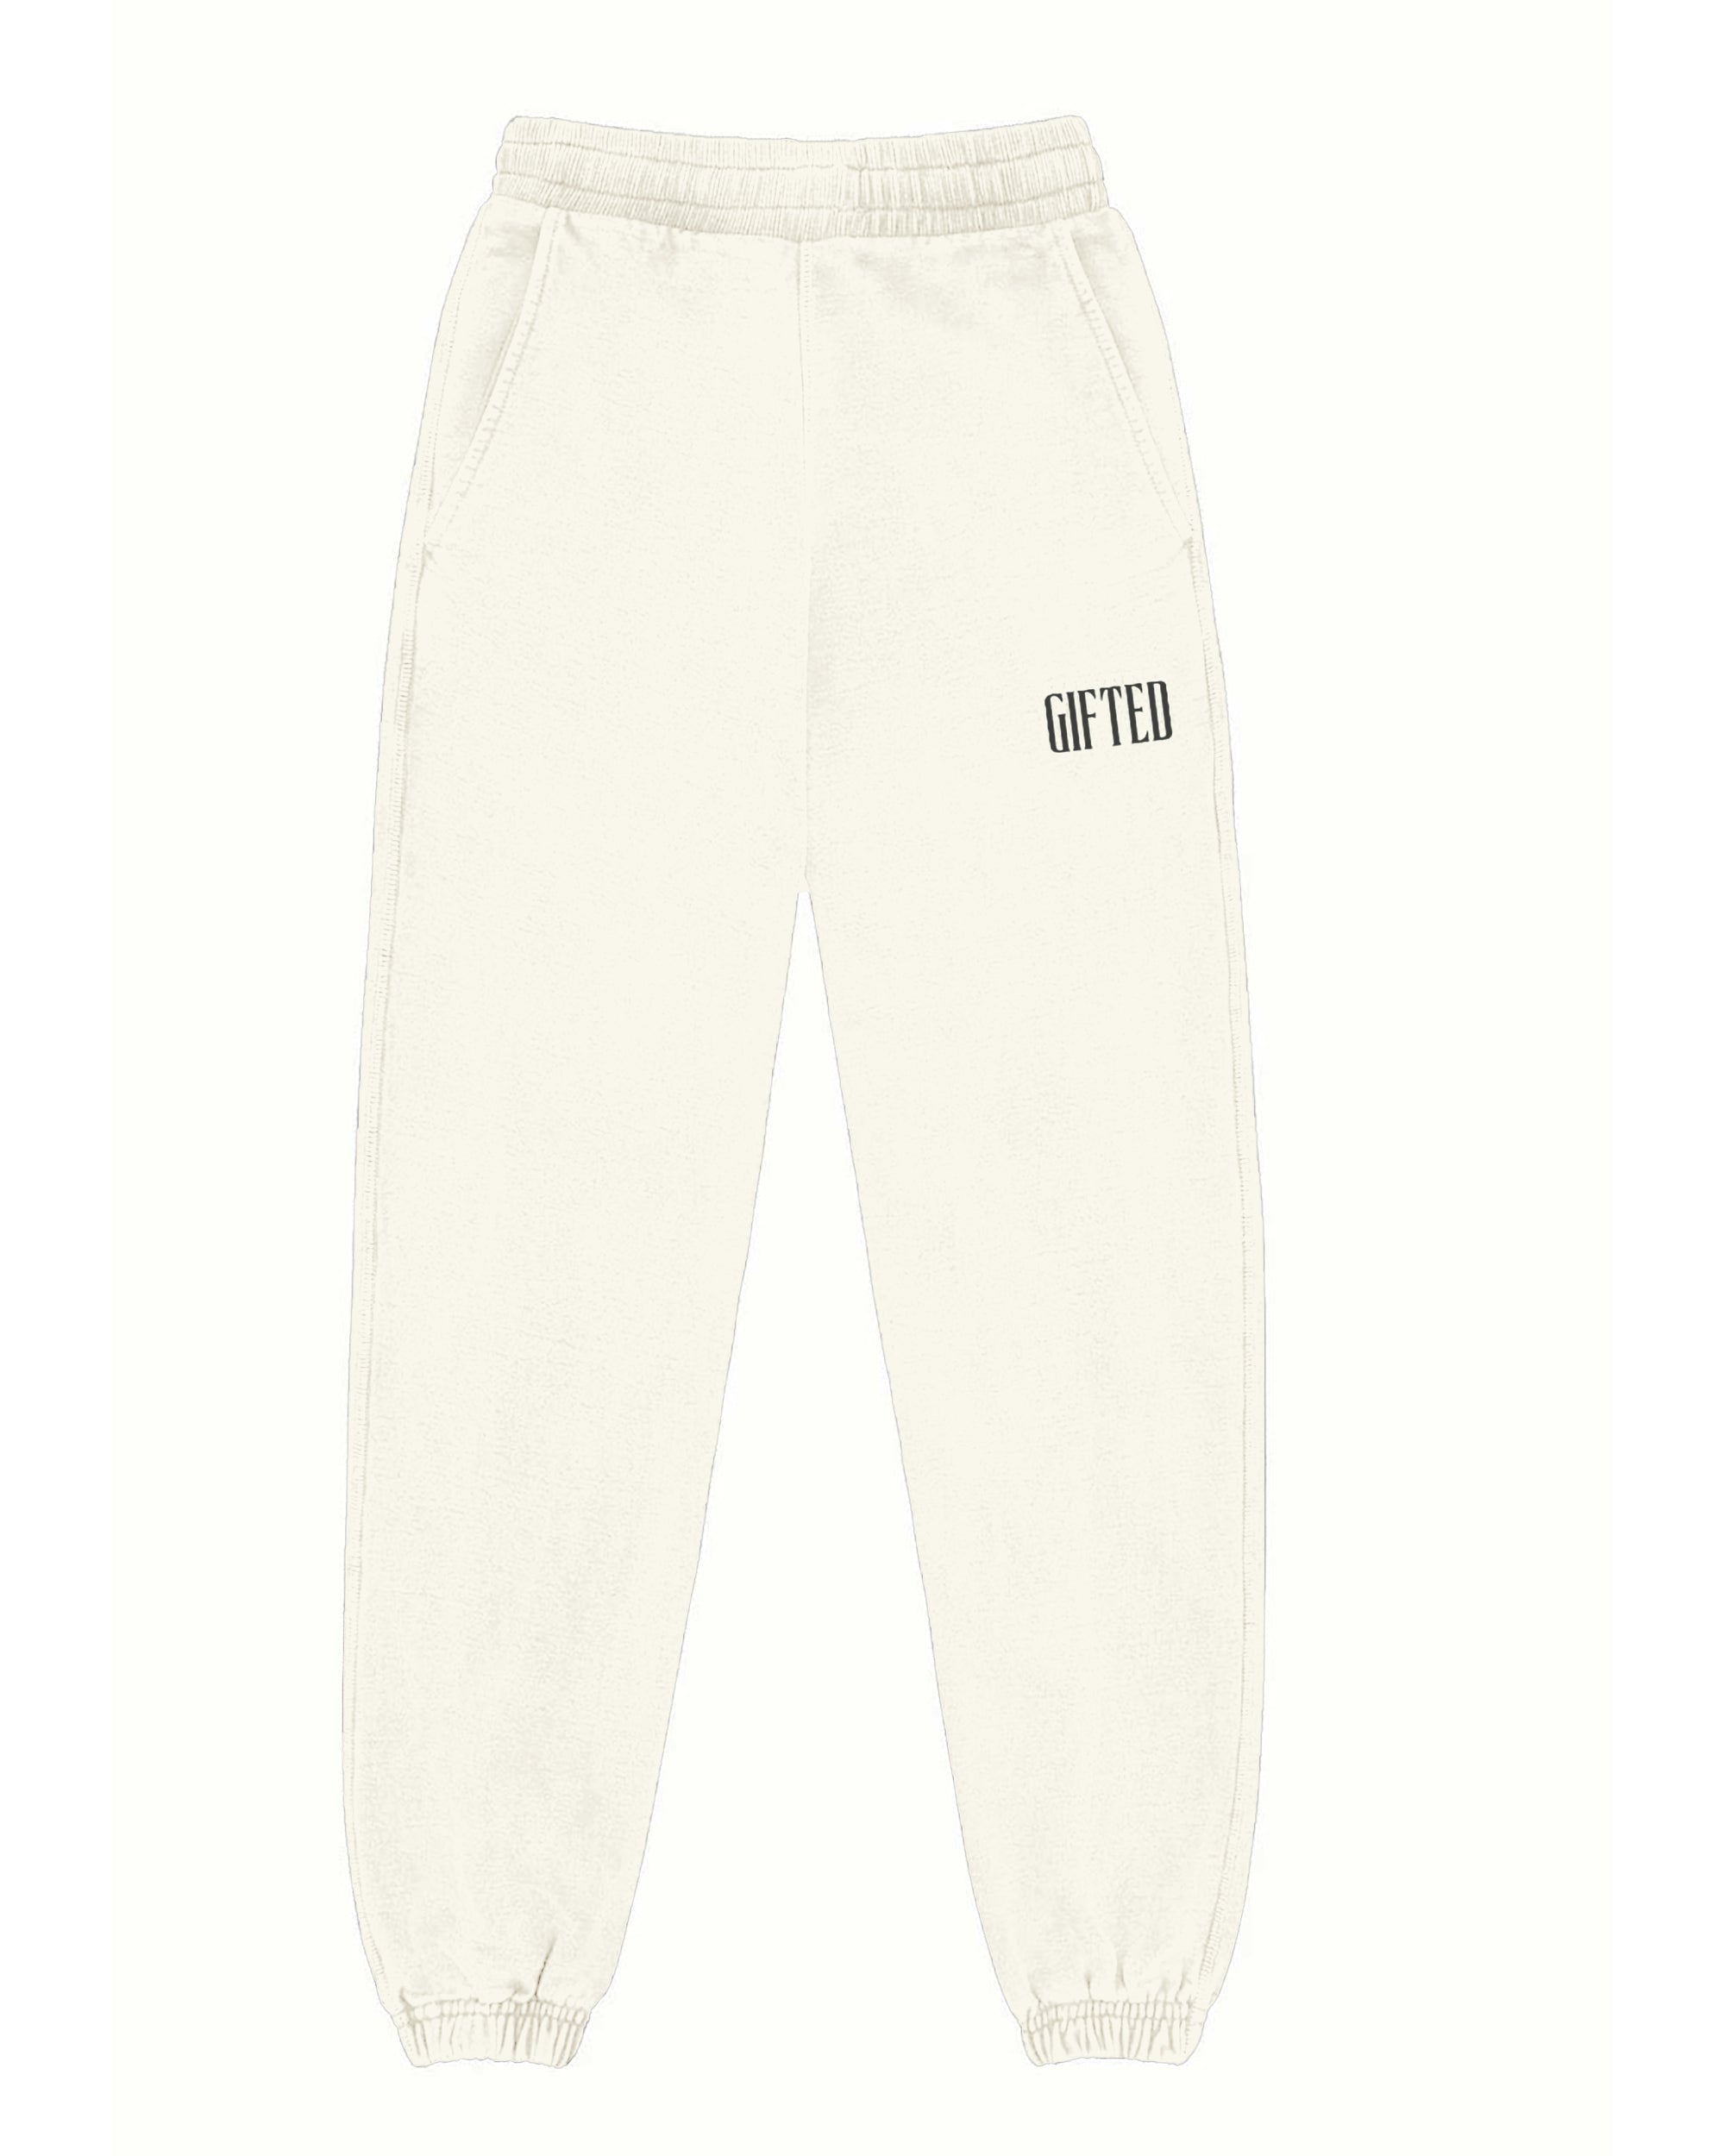 Gifted Joggers - Vintage White